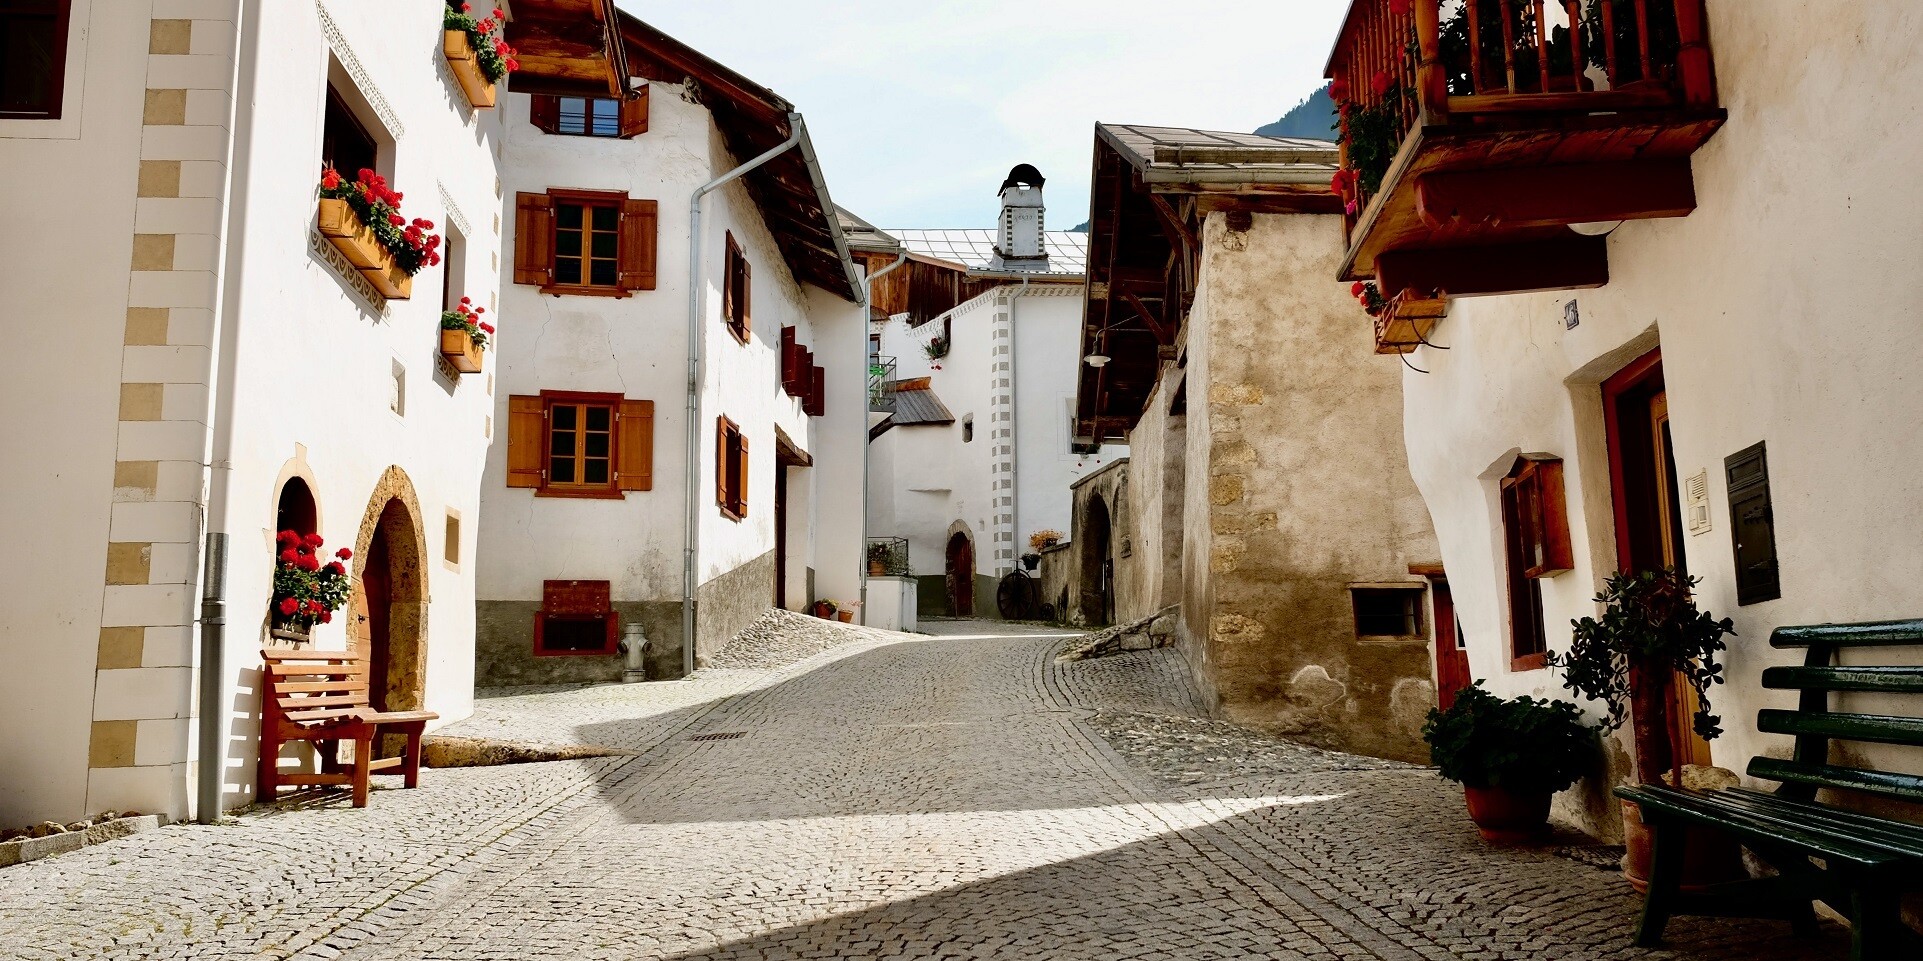 A steep path with cobble stones between the typical Engadin homes.